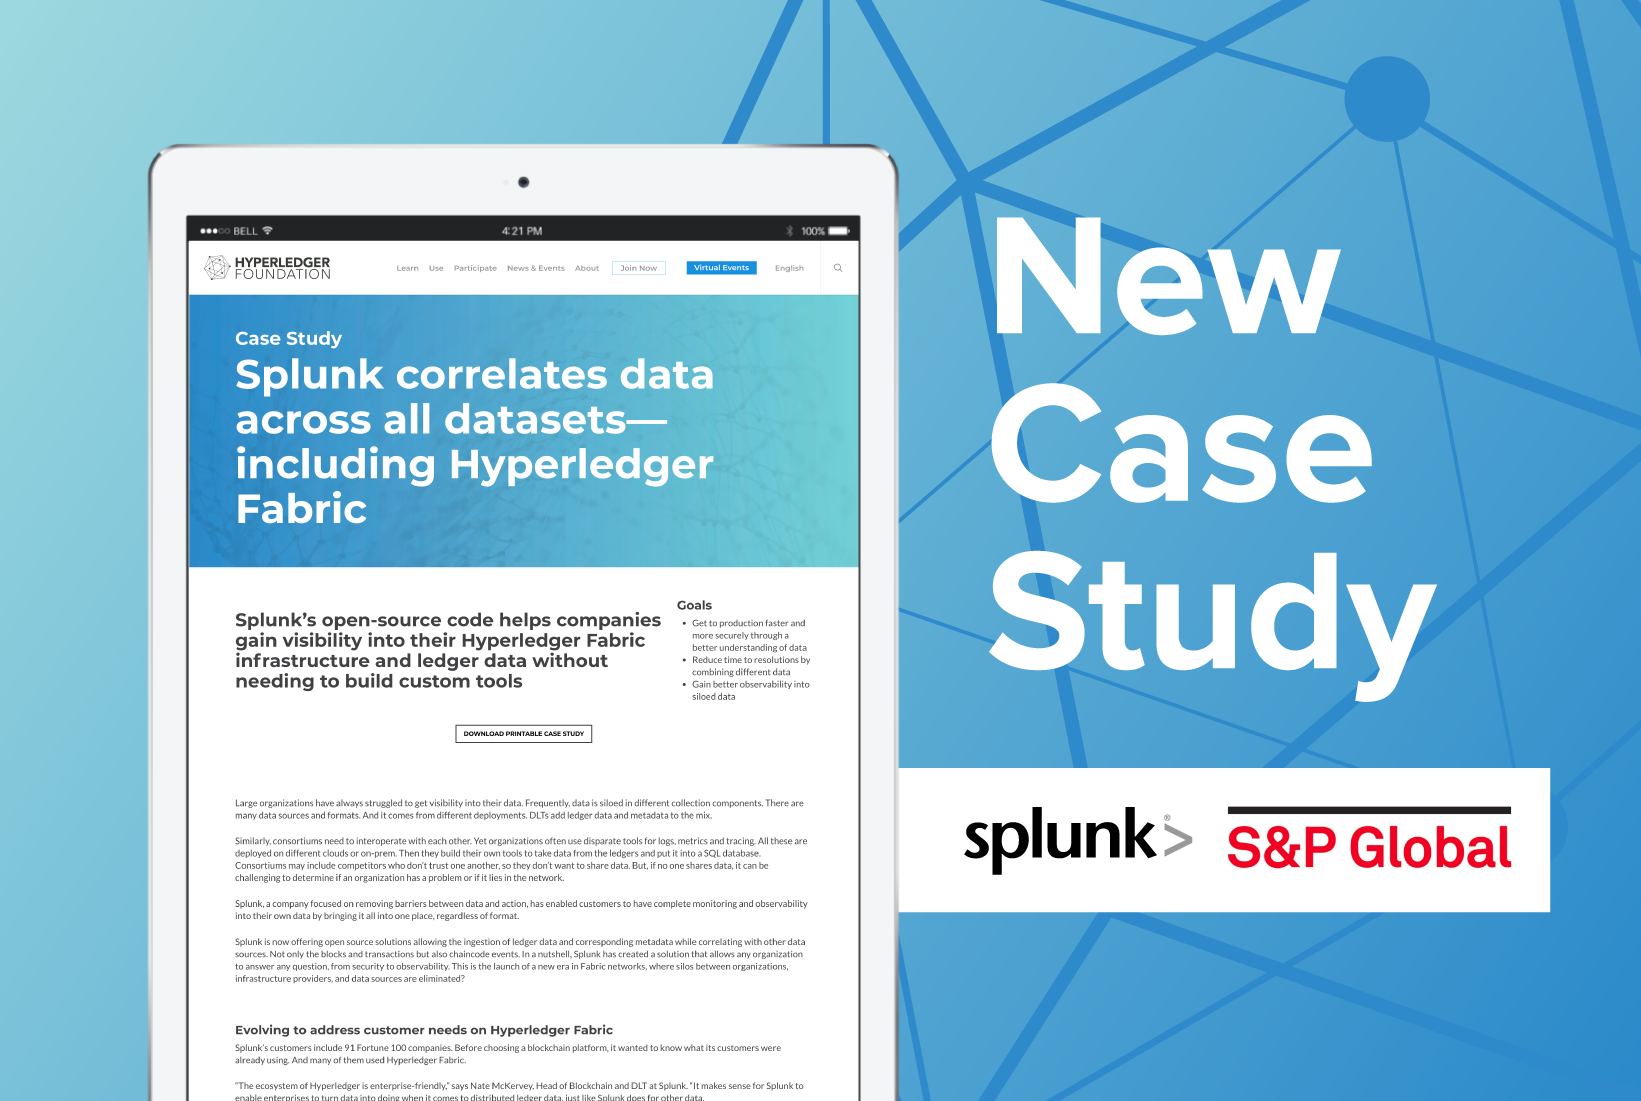 Splunk Adds Hyperledger Fabric Data Visibility into Mix, Powers New Blockchain-Based Content Management Solution for S&P Global